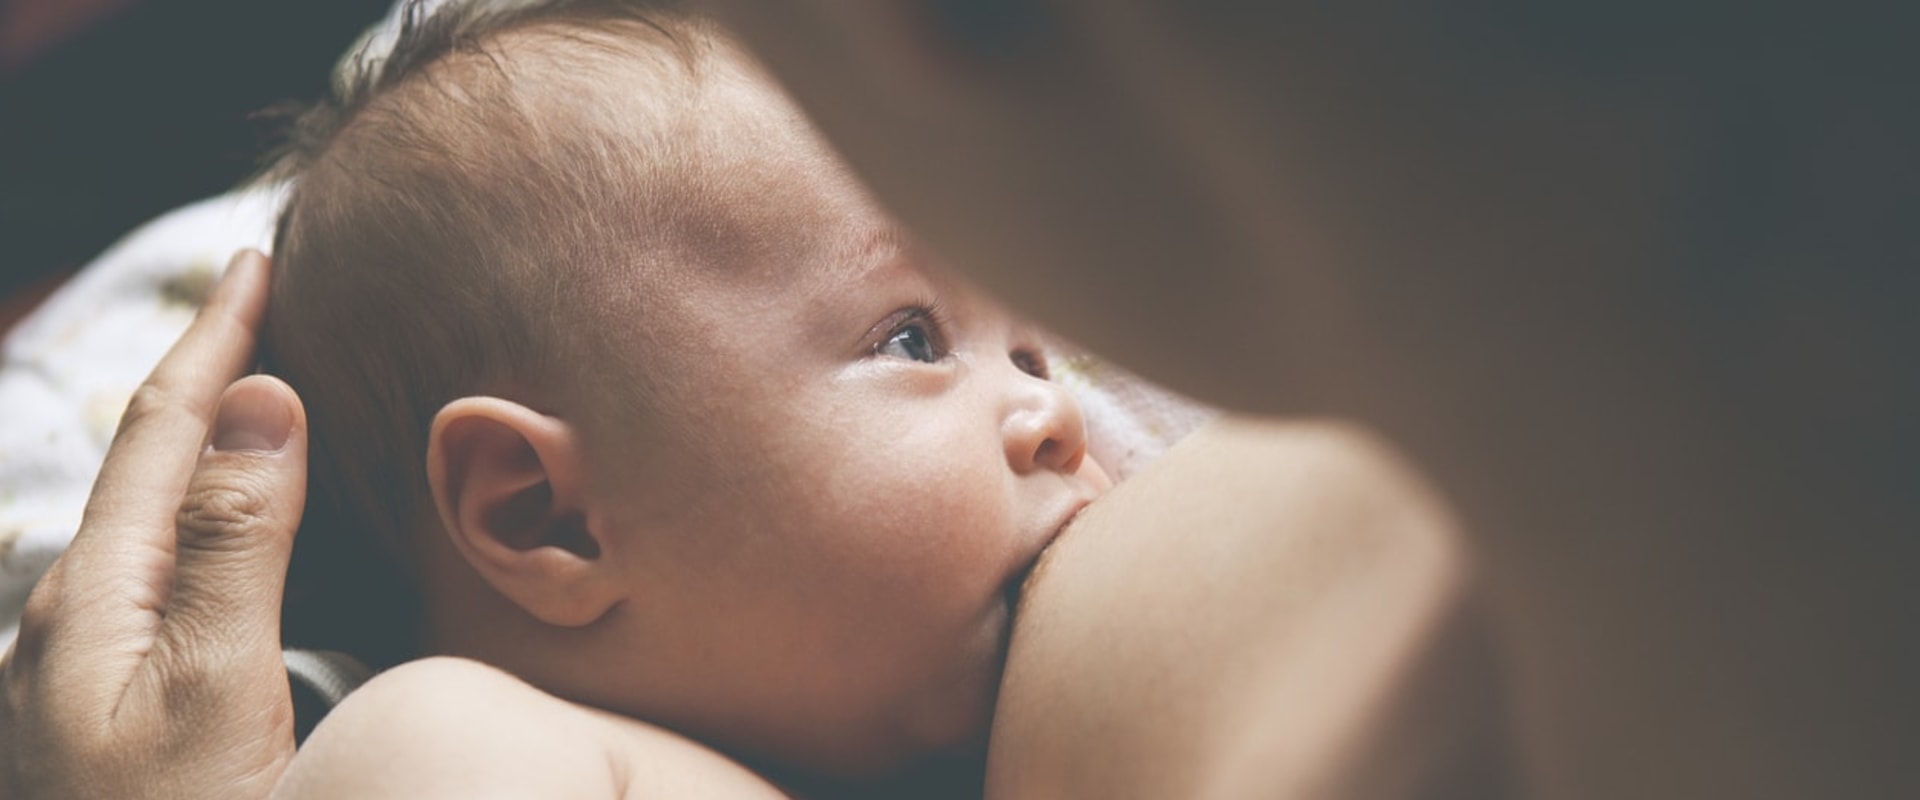 How much vitamin d should mom take for breastfed baby?